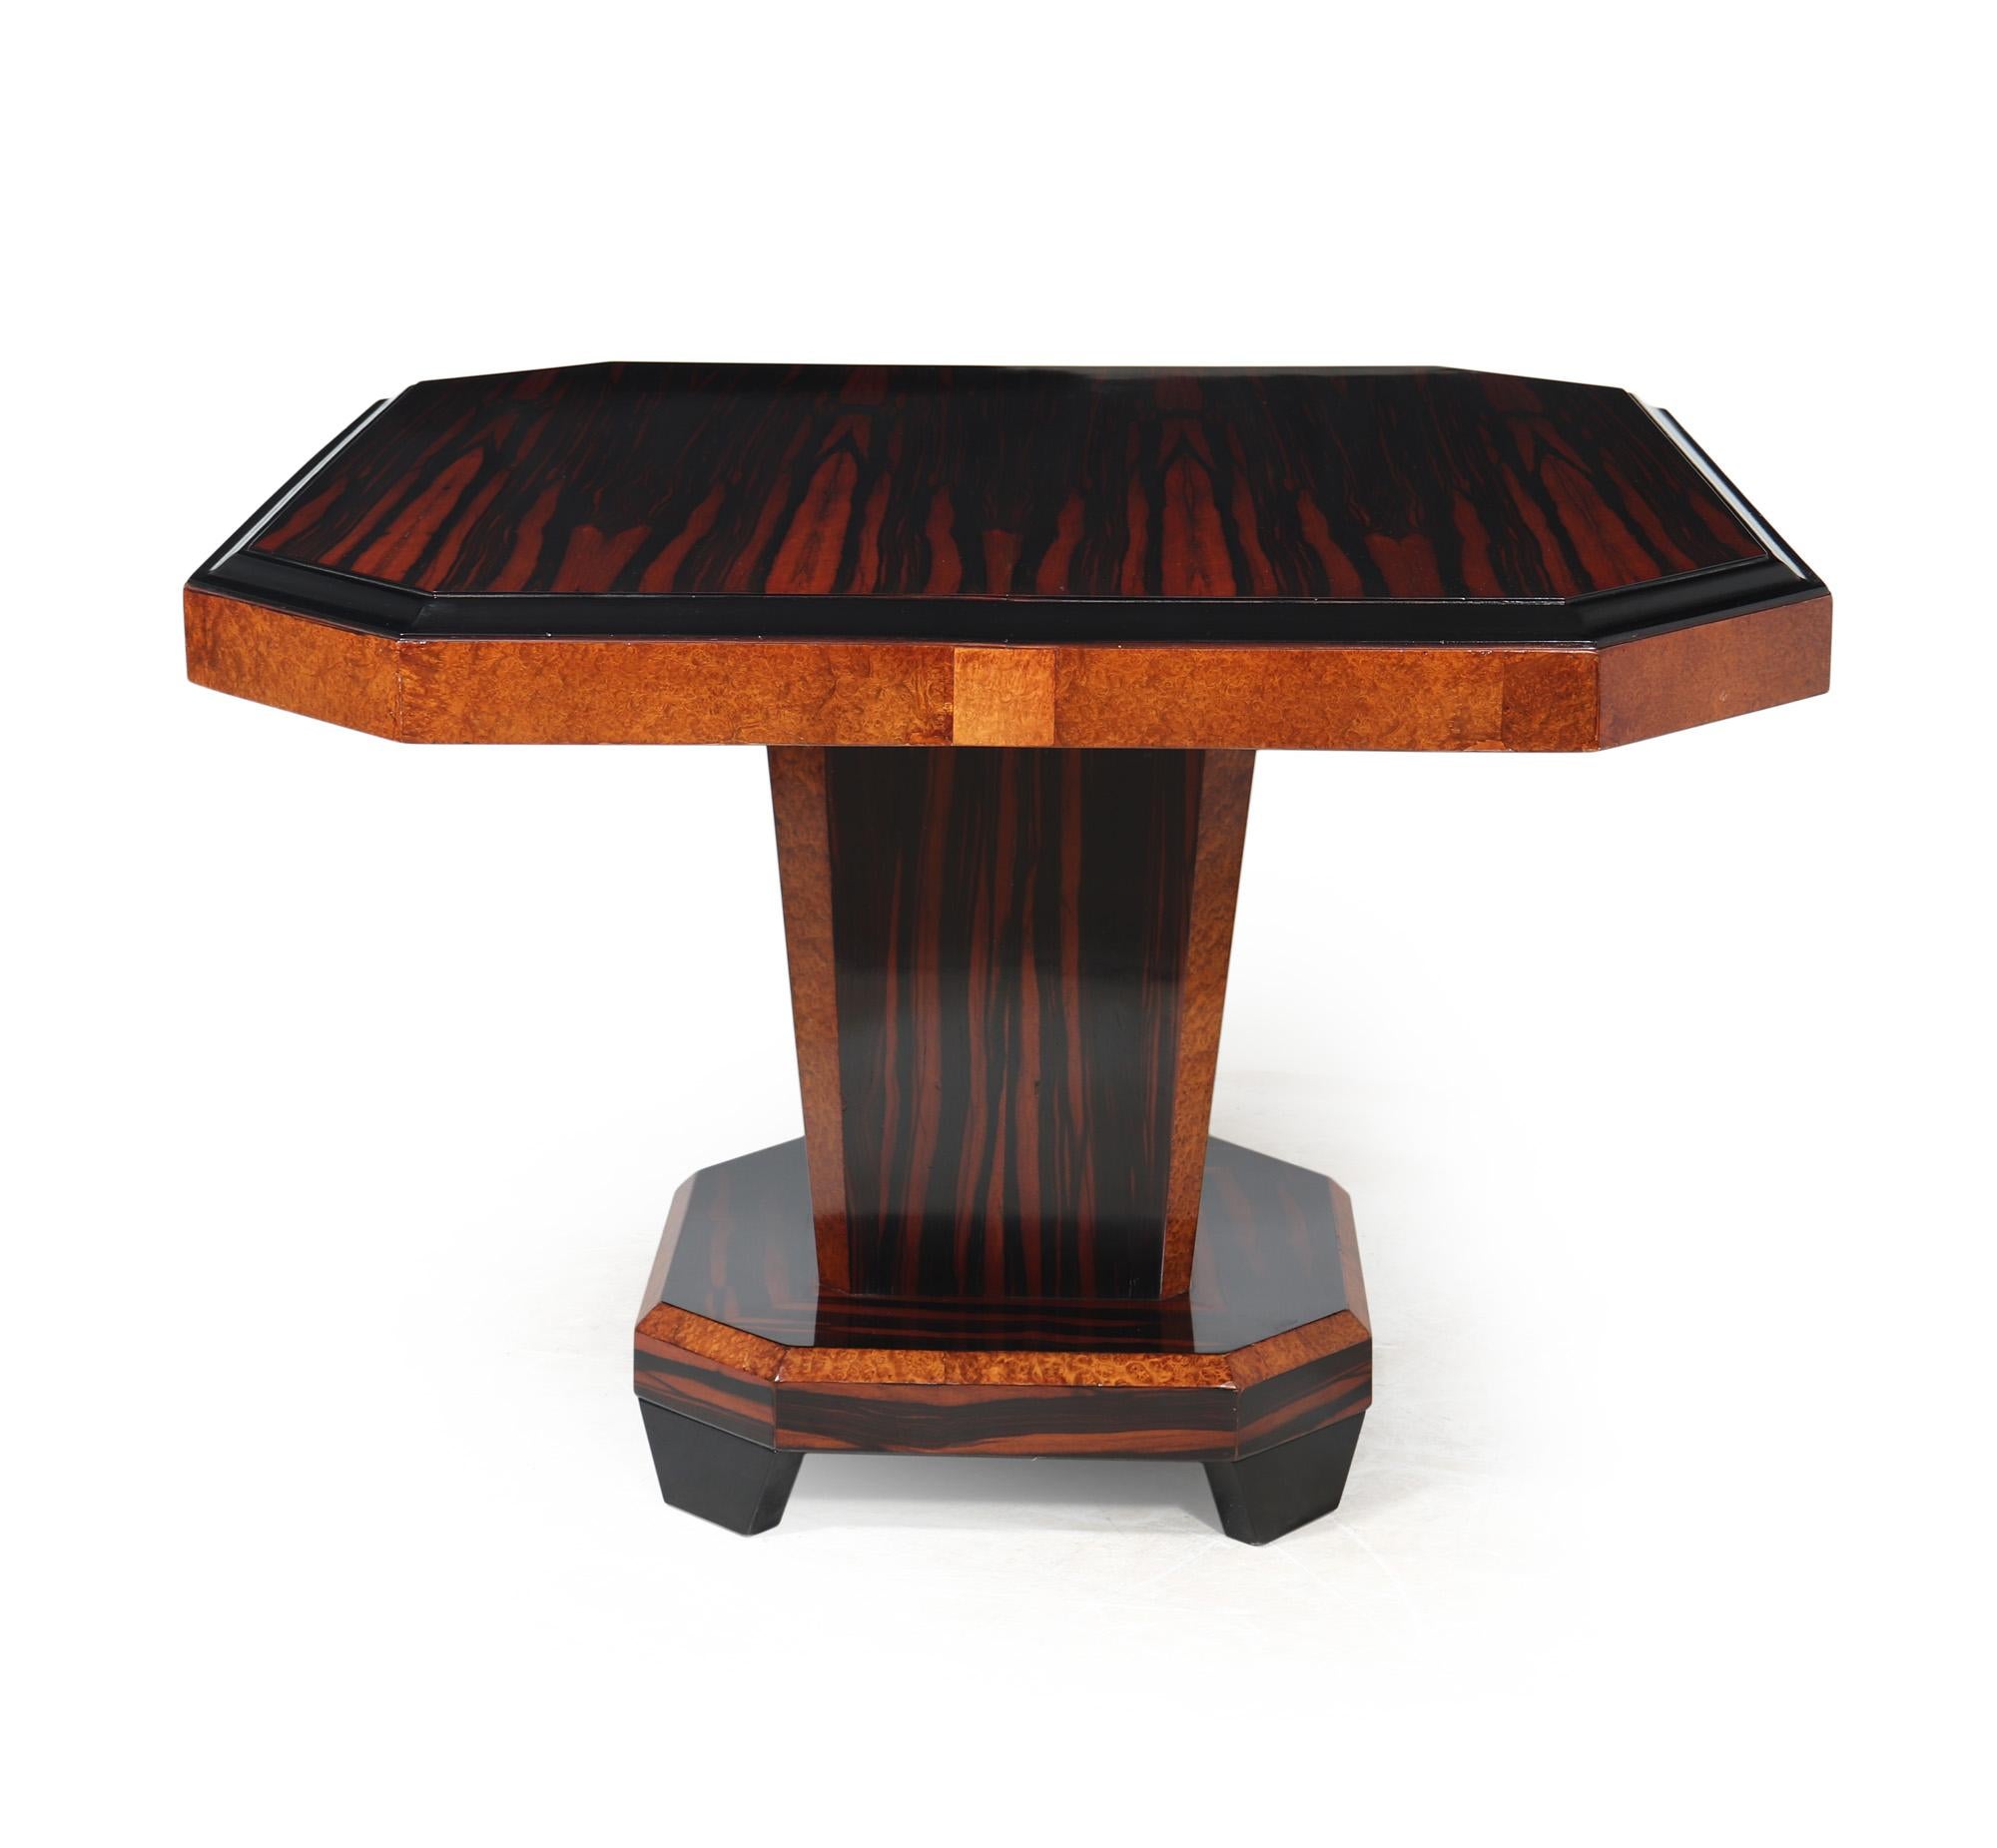 FRENCH ART DECO DINING TABLE
This exquisite dining table, produced in France in the 1920's, has a unique and sophisticated design that captures the eye. Crafted using high-quality Macassar ebony and amboyna, its square top features elegantly canted